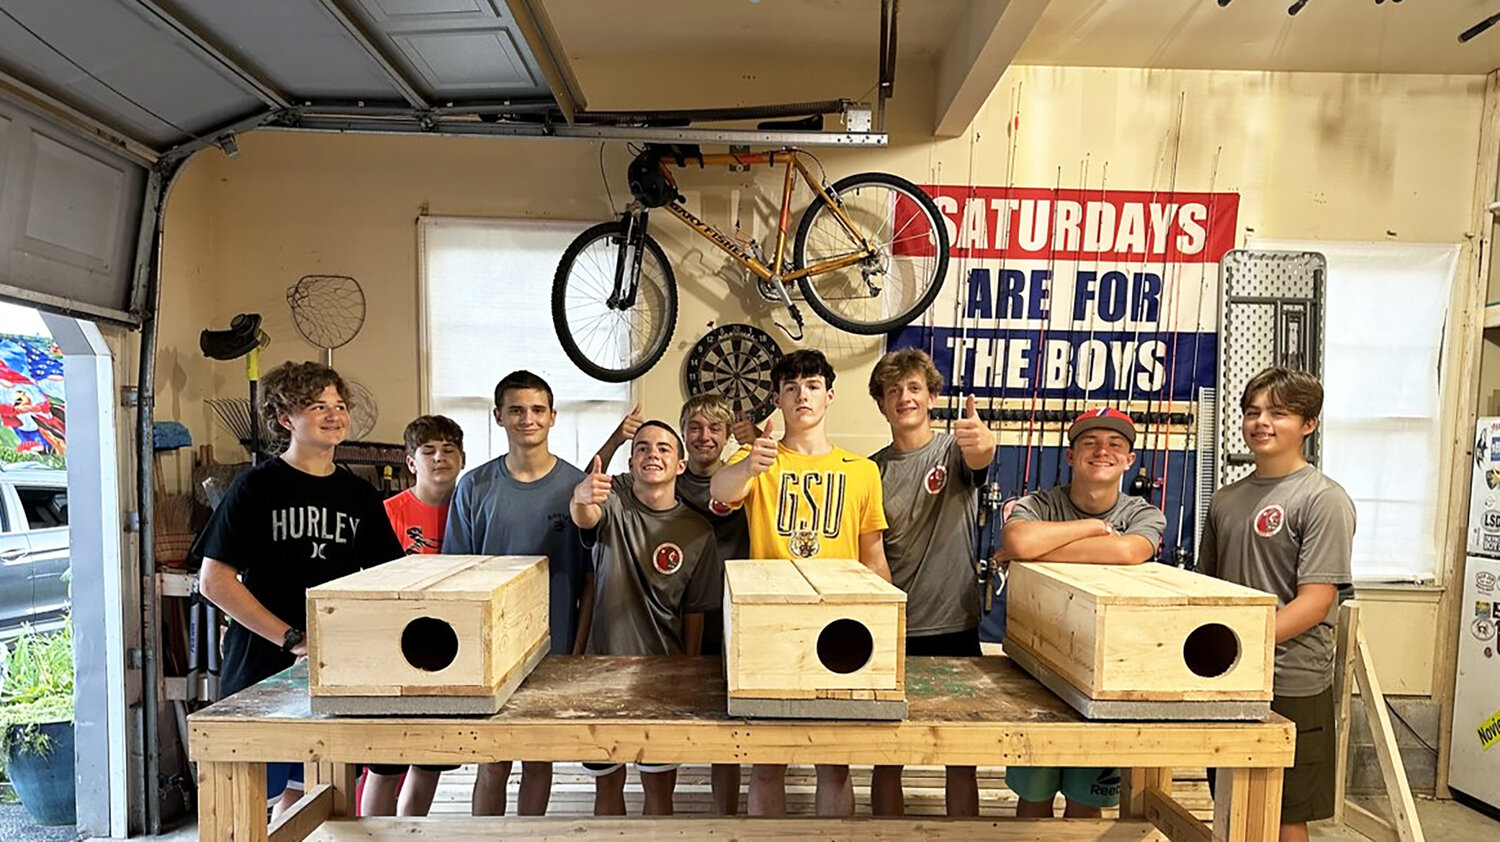 The Scouts with their catfish boxes include, from left, .Ethan Rich, Miles Rich, Ben Carter, Jacob Collins, Nathan Brothers, Jack Thornton, Chase Armour, Achilles Van Aulen and Gabriel Cruz.